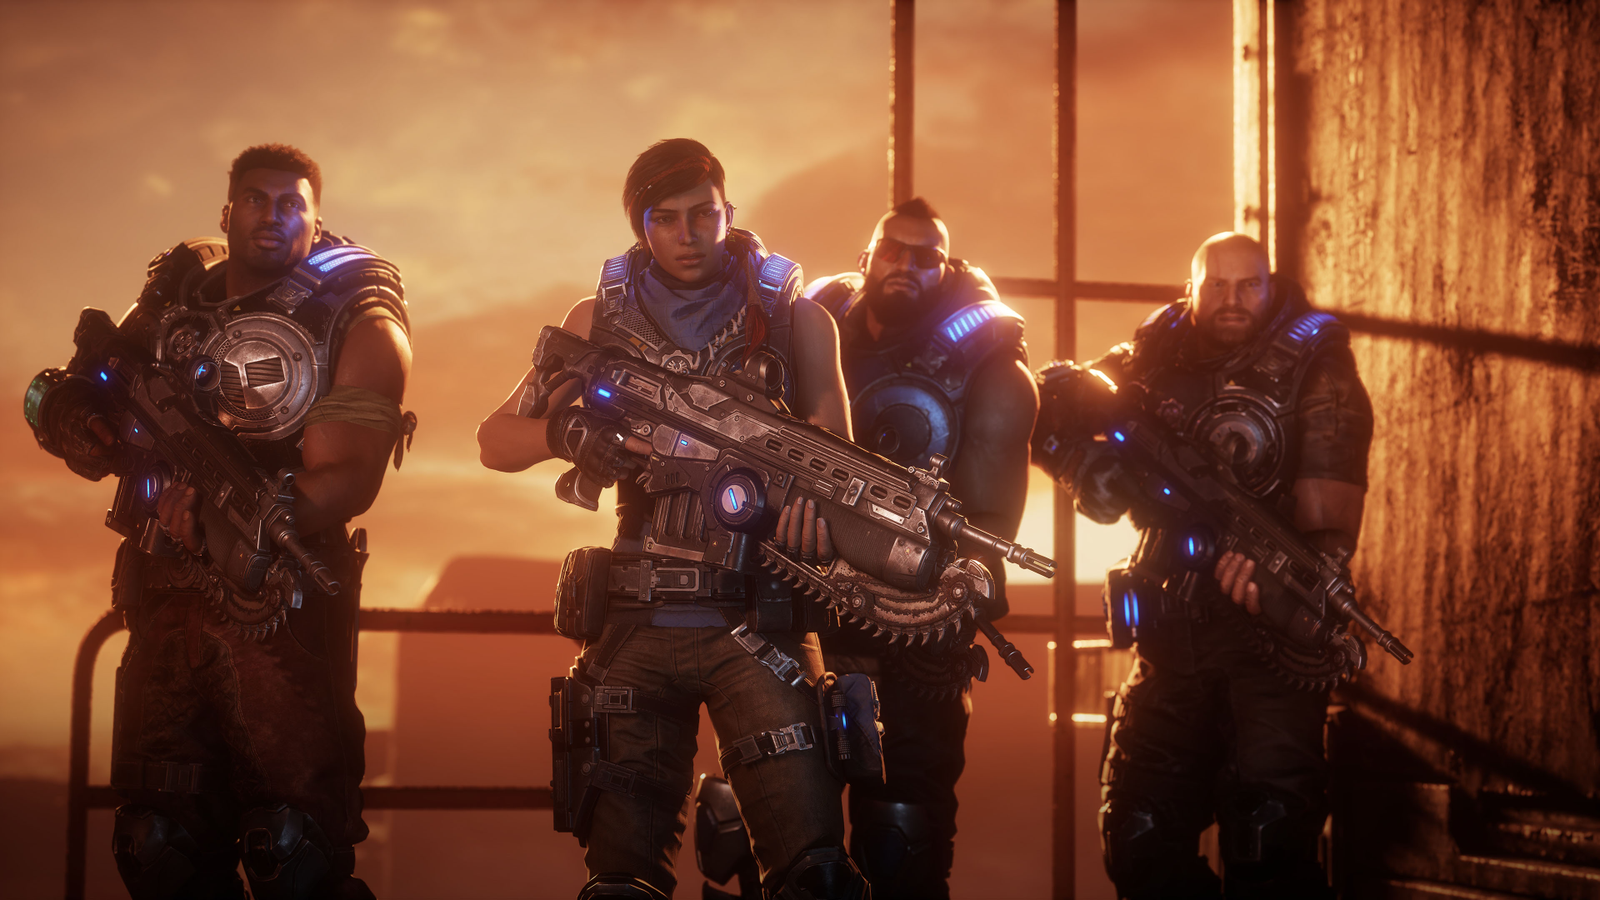 Gears 5 review: An obvious gaming recommendation—if you already